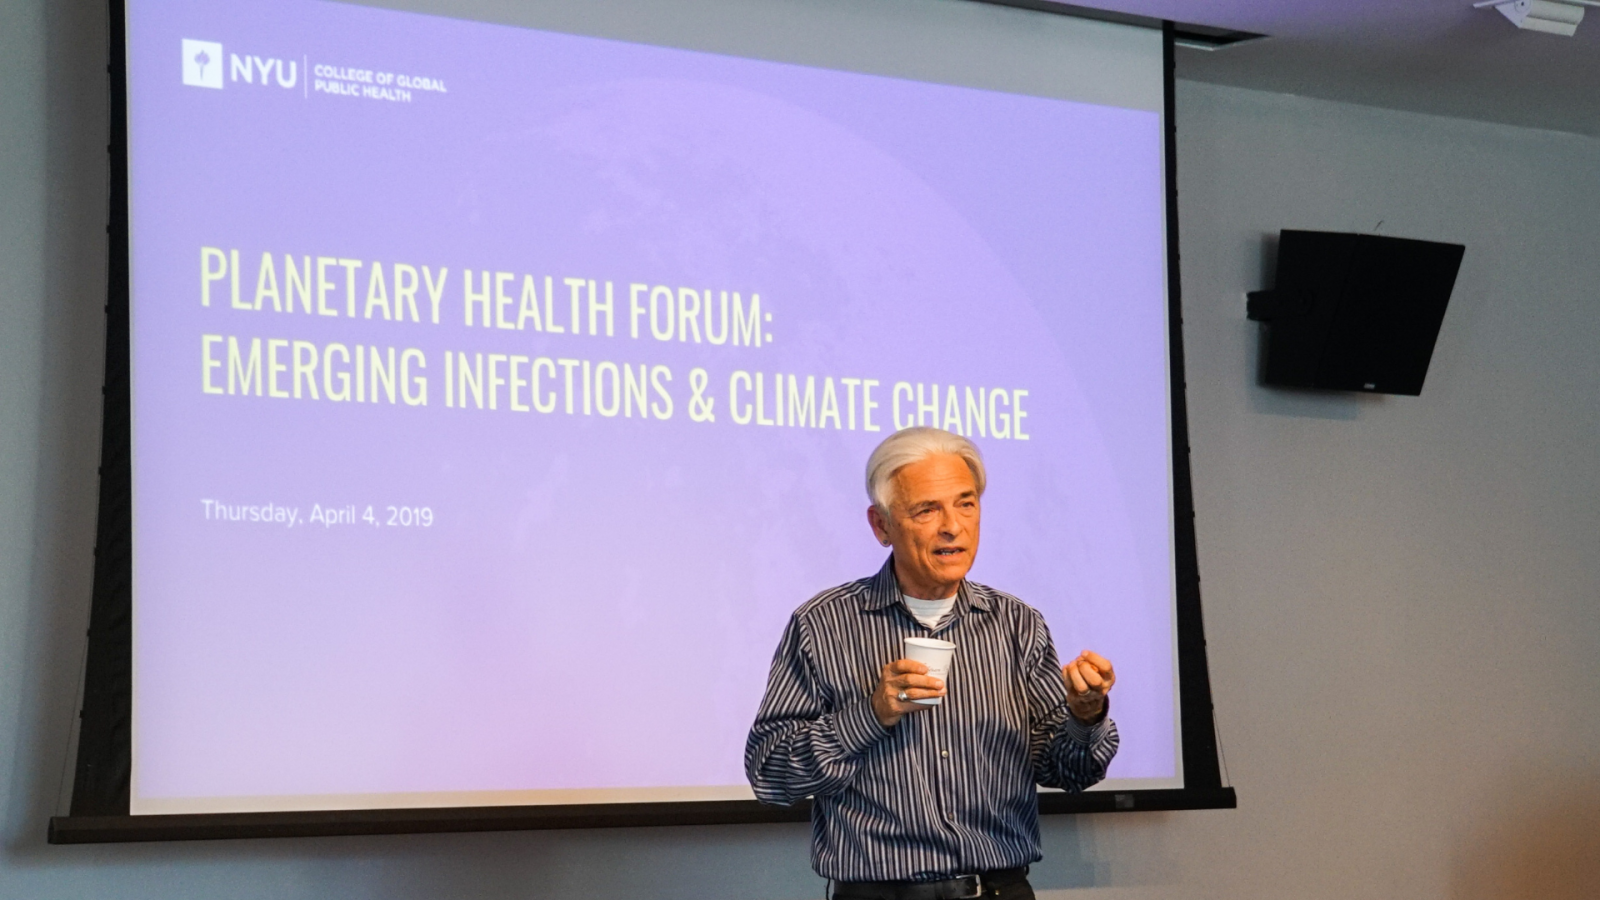 Planetary Health Forum: Emerging Infections & Climate Change